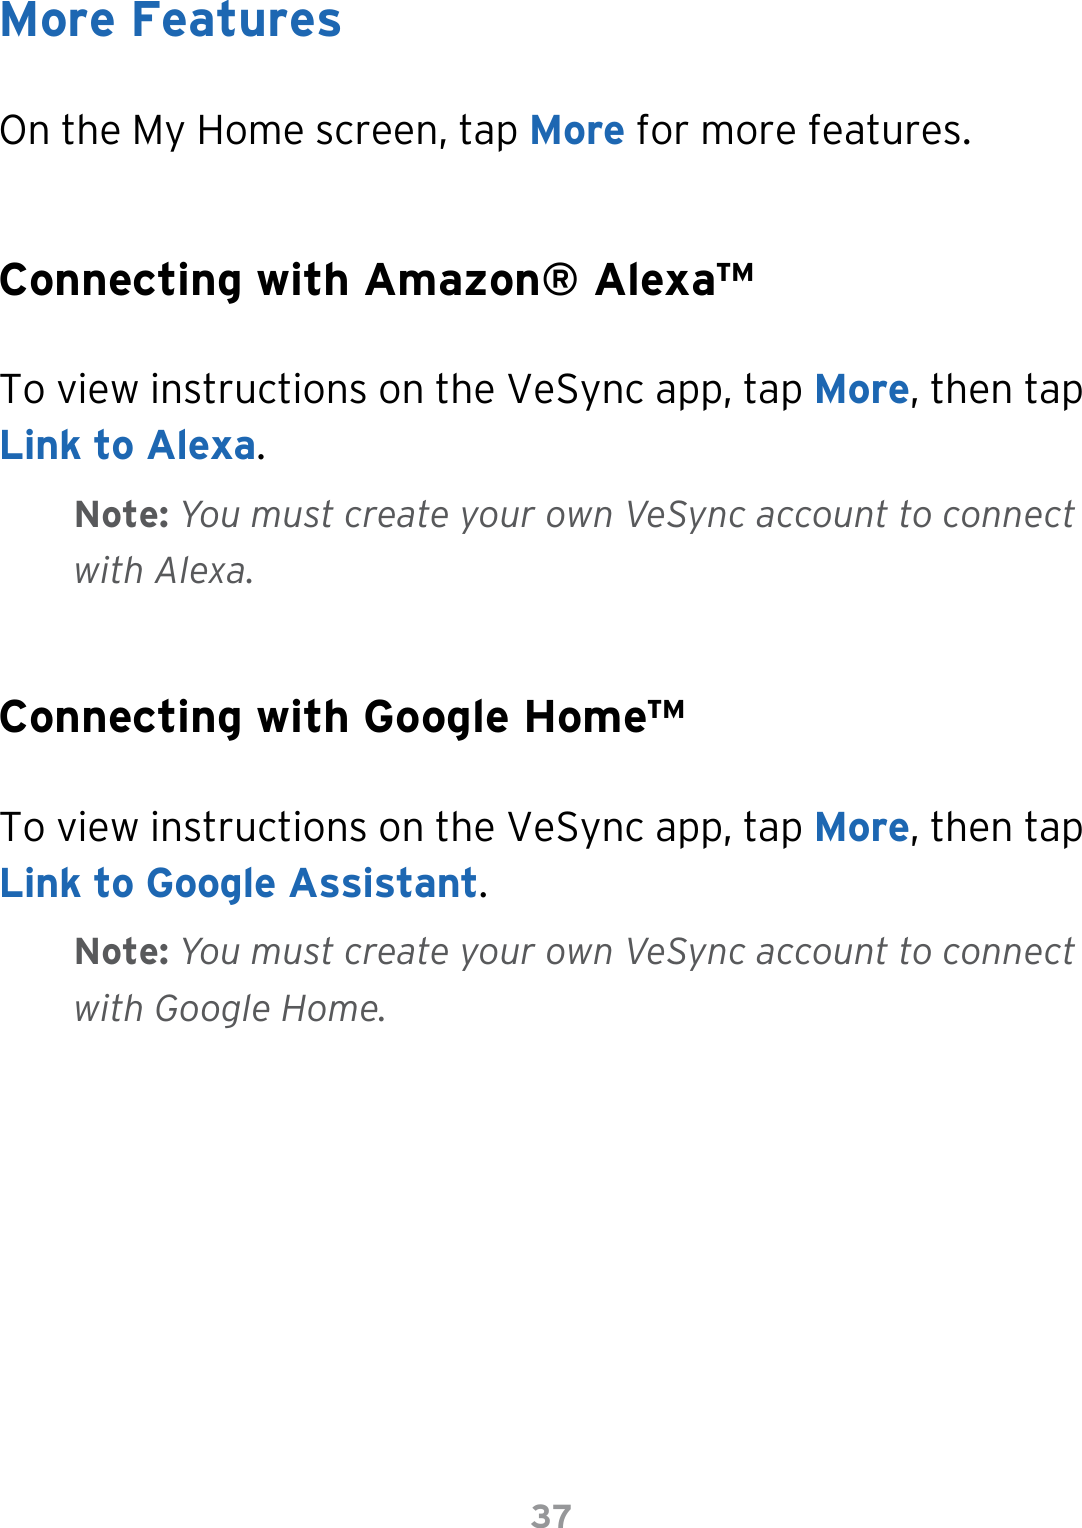 37On the My Home screen, tap More for more features.To view instructions on the VeSync app, tap More, then tap Link to Alexa.  To view instructions on the VeSync app, tap More, then tap Link to Google Assistant.More FeaturesConnecting with Amazon® Alexa™Connecting with Google Home™Note: You must create your own VeSync account to connect with Alexa.Note: You must create your own VeSync account to connect with Google Home.